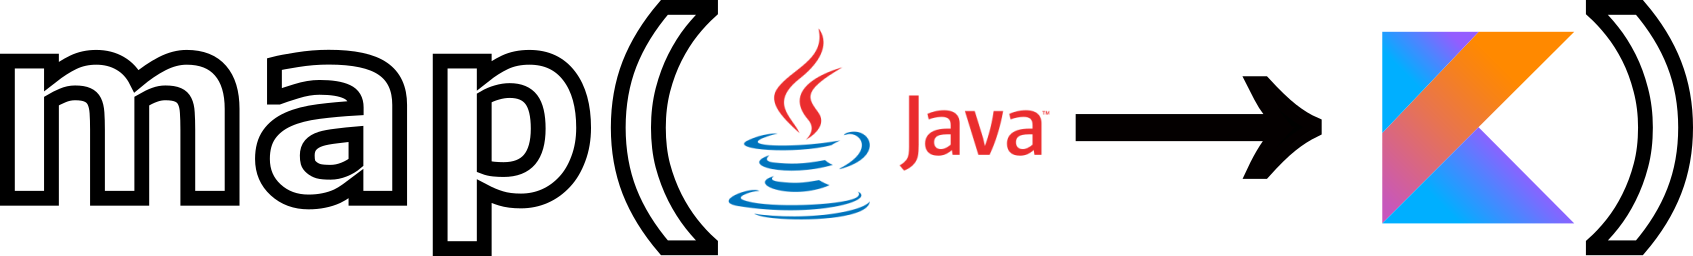 One Of The Reasons We Love Kotlin Is Because It Has - Java: A Detailed Approach To Practical Coding (1693x256)